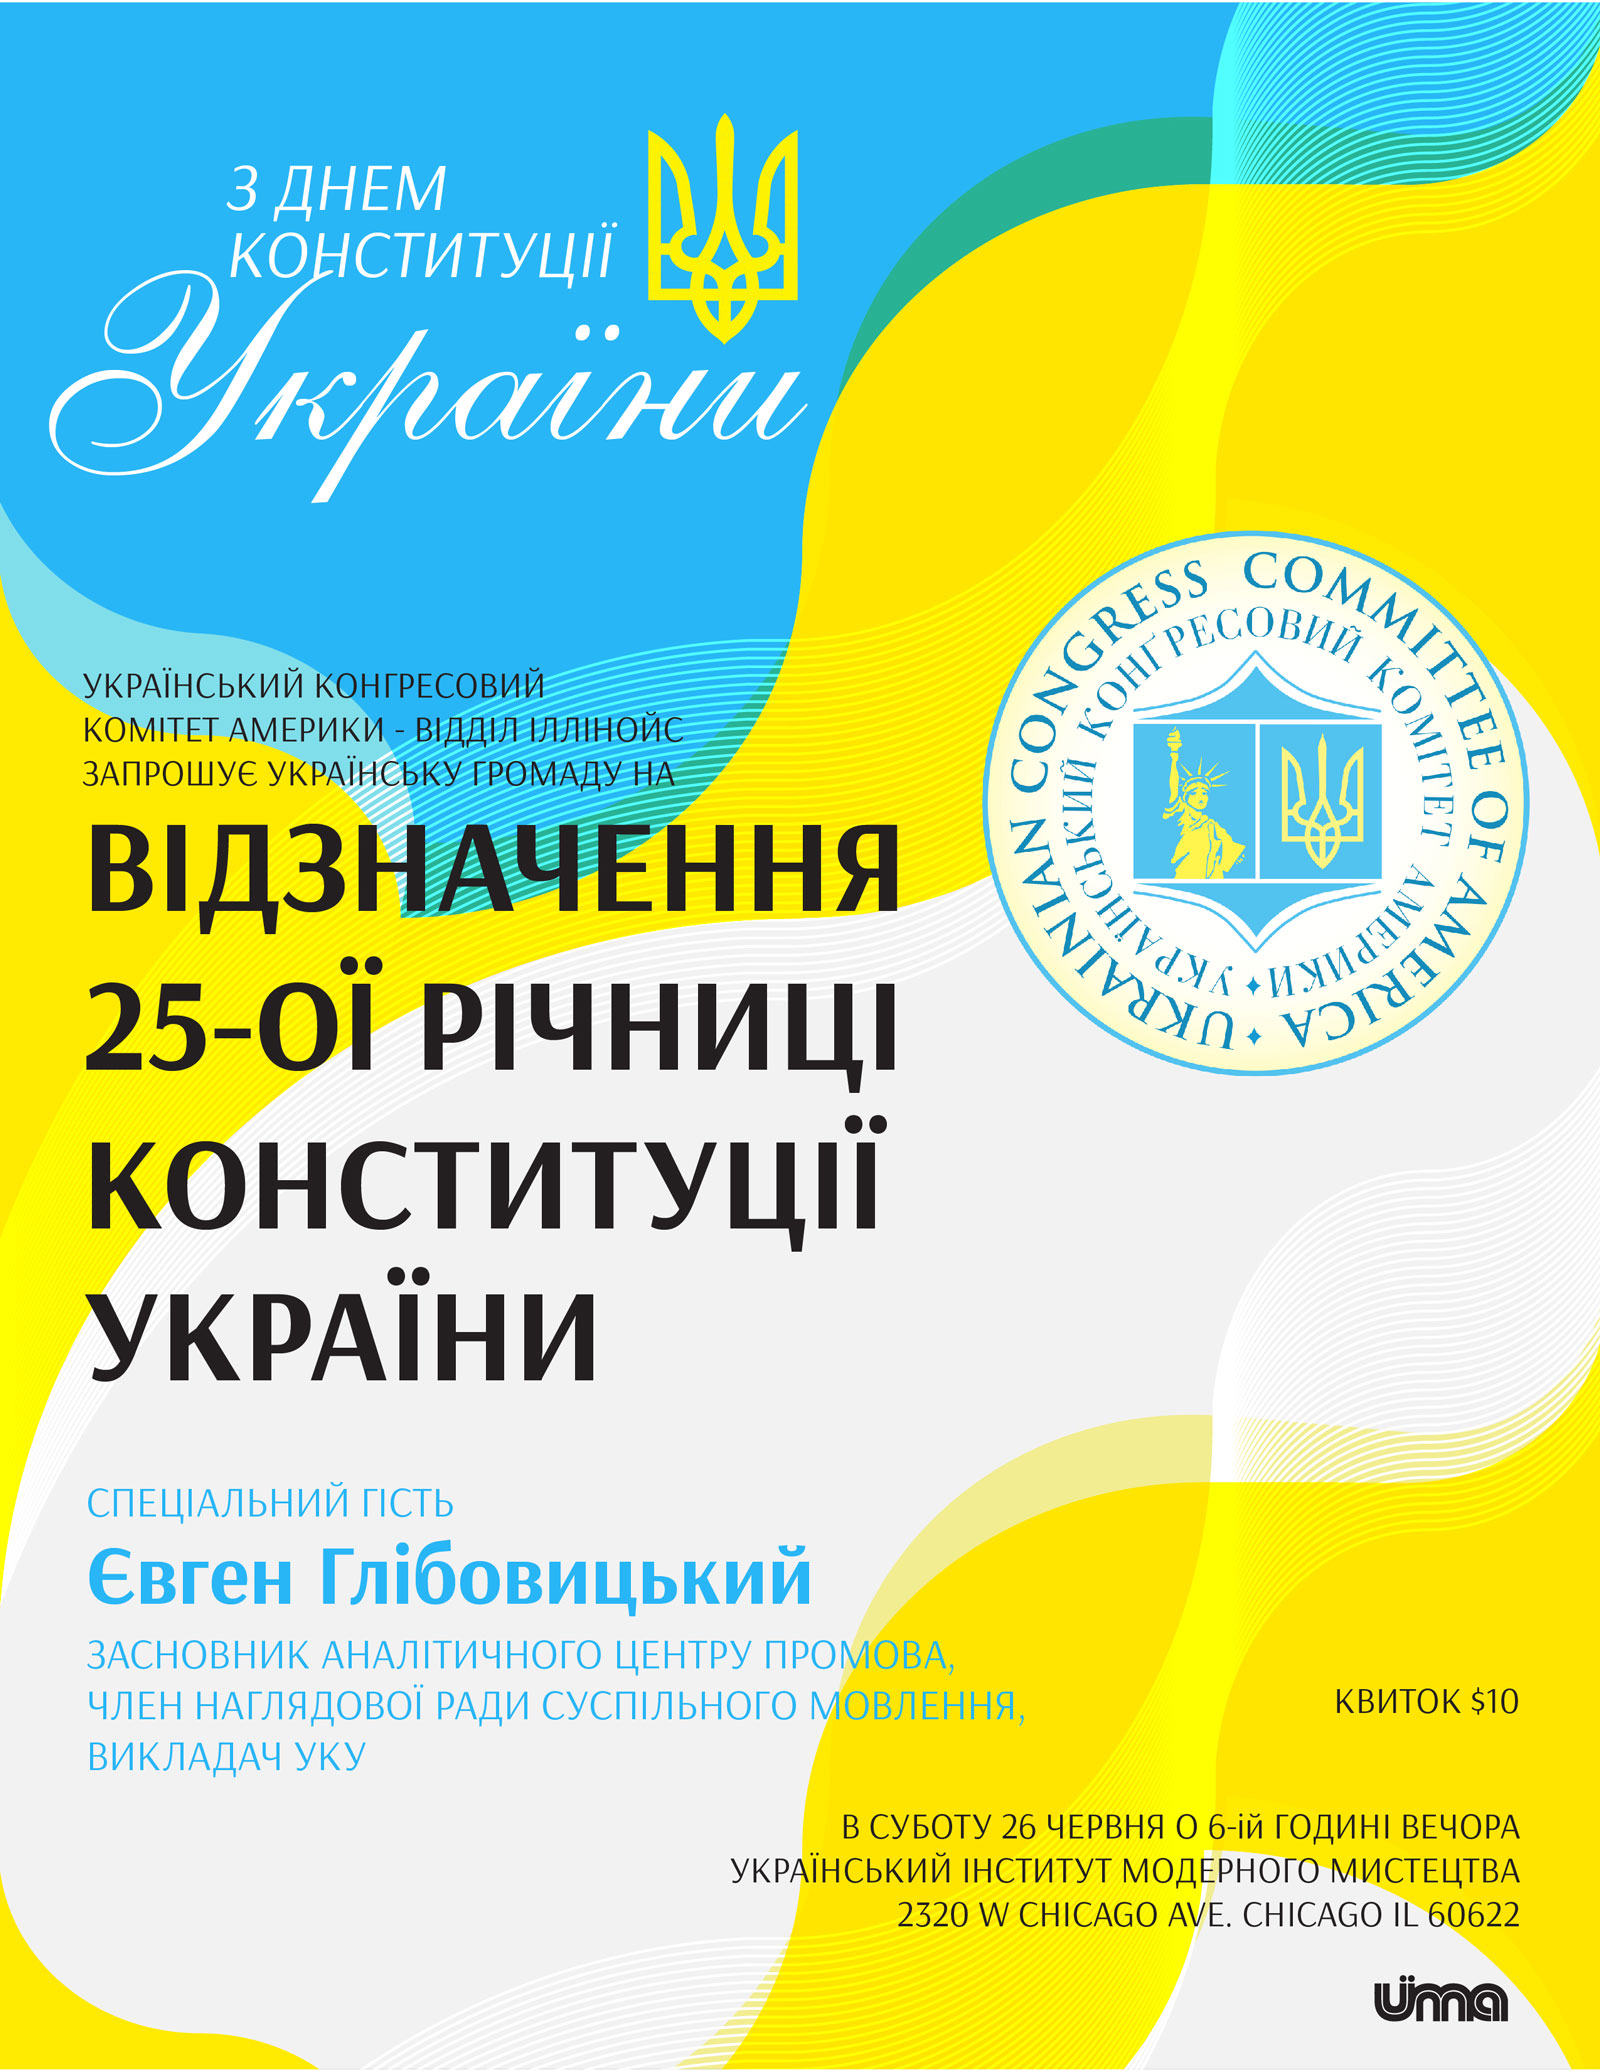 Featured image for “Ukrainian Constitution Day”